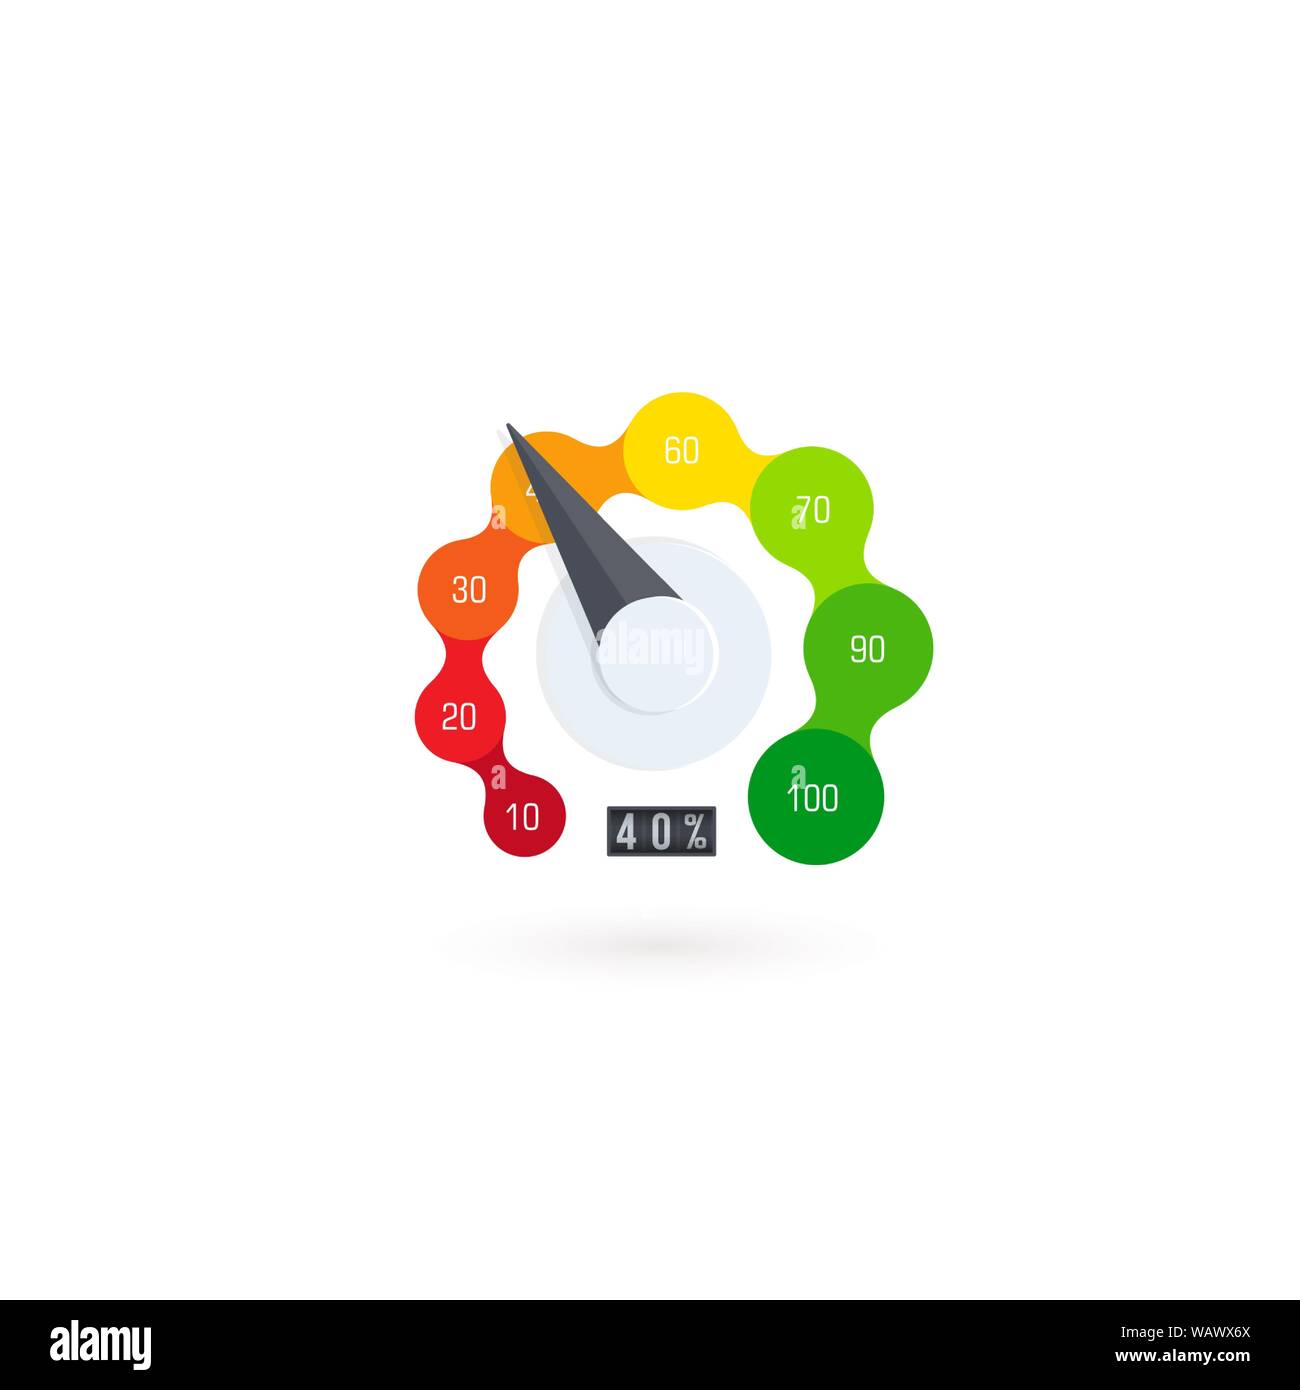 Business meter or business indicator template with emotional cartoon face. Abstract Rating icon. Quality control vector illustration. Bar level meter. Stock Vector